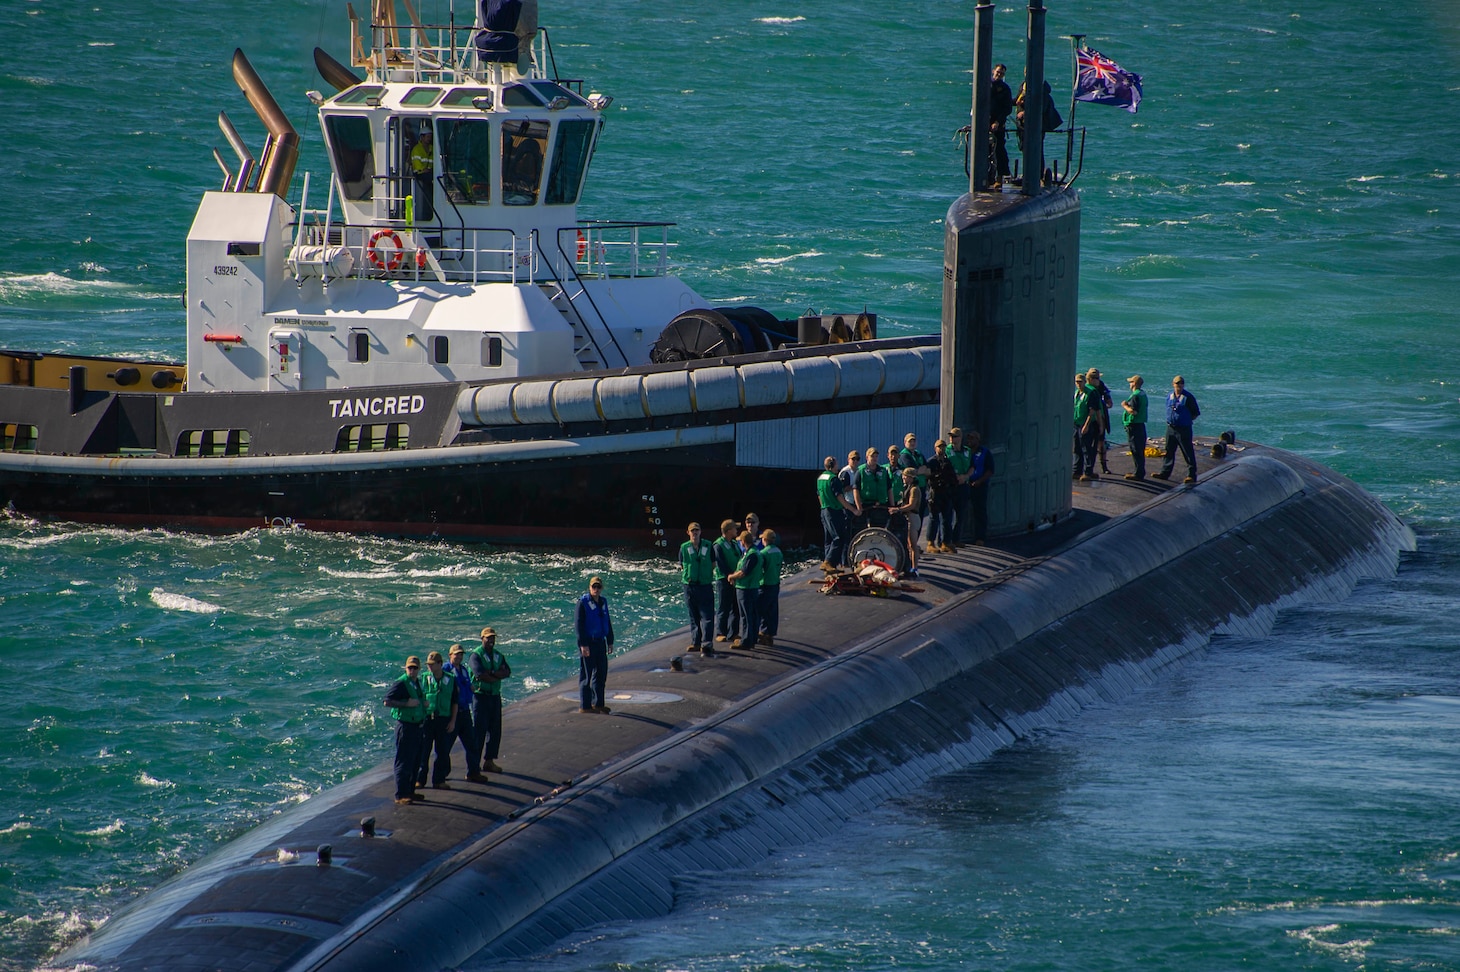 PERTH, Australia (April 23, 2022) The Los Angeles-class fast-attack submarine USS Springfield (SSN 761) prepares to moor alongside the Emory S. Land-class submarine tender USS Frank Cable (AS 40) at HMAS Stirling Navy Base, April 23, 2022. Frank Cable is currently on patrol conducting expeditionary maintenance and logistics in support of national security in the U.S. 7th Fleet area of operations. (U.S. Navy photo by Mass Communication Specialist Seaman Wendy Arauz/Released)